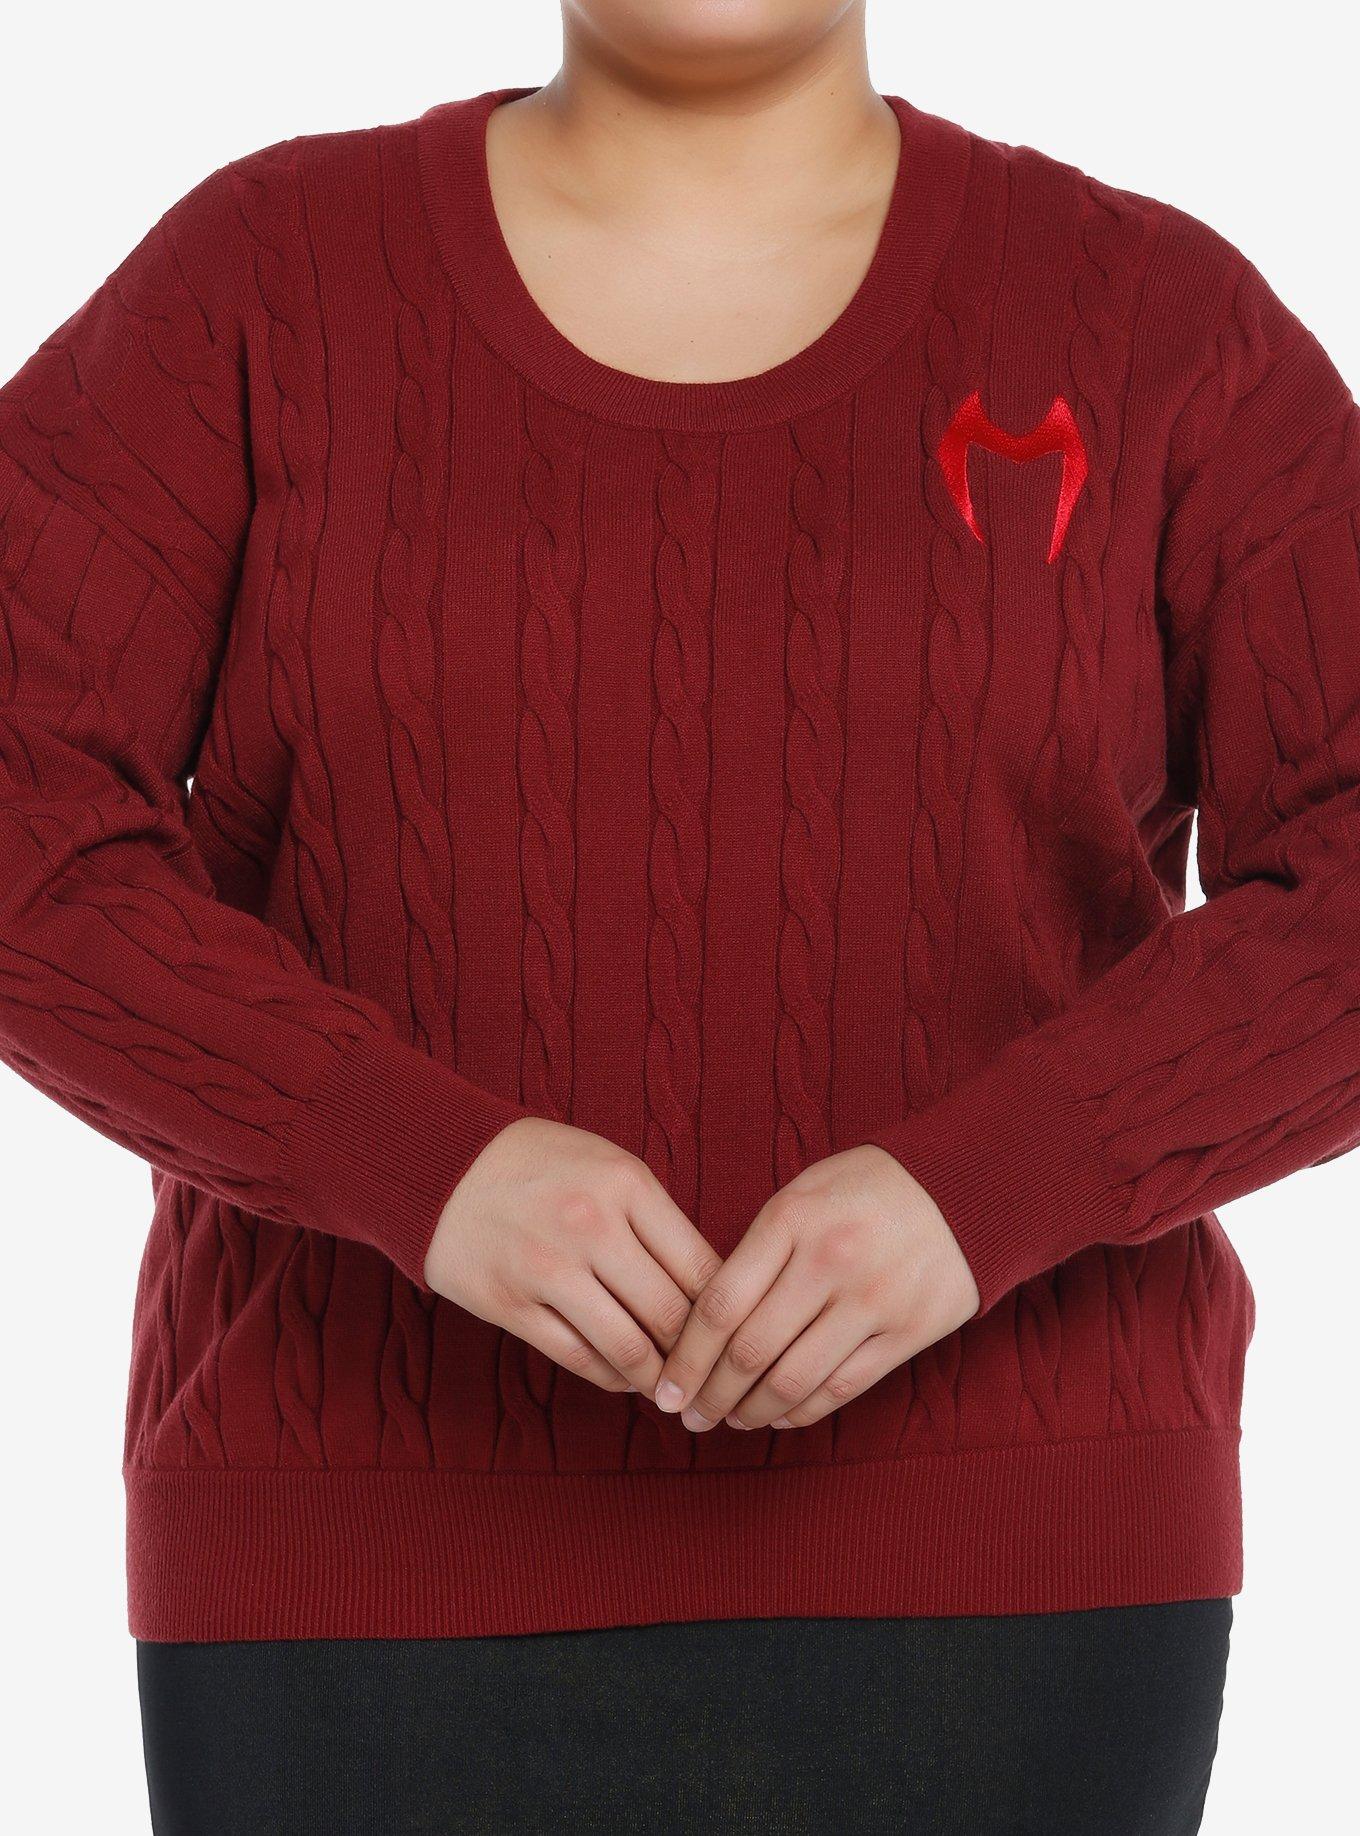 Her Universe Marvel Scarlet Witch Knit Sweater Plus Size Her Universe Exclusive, , hi-res